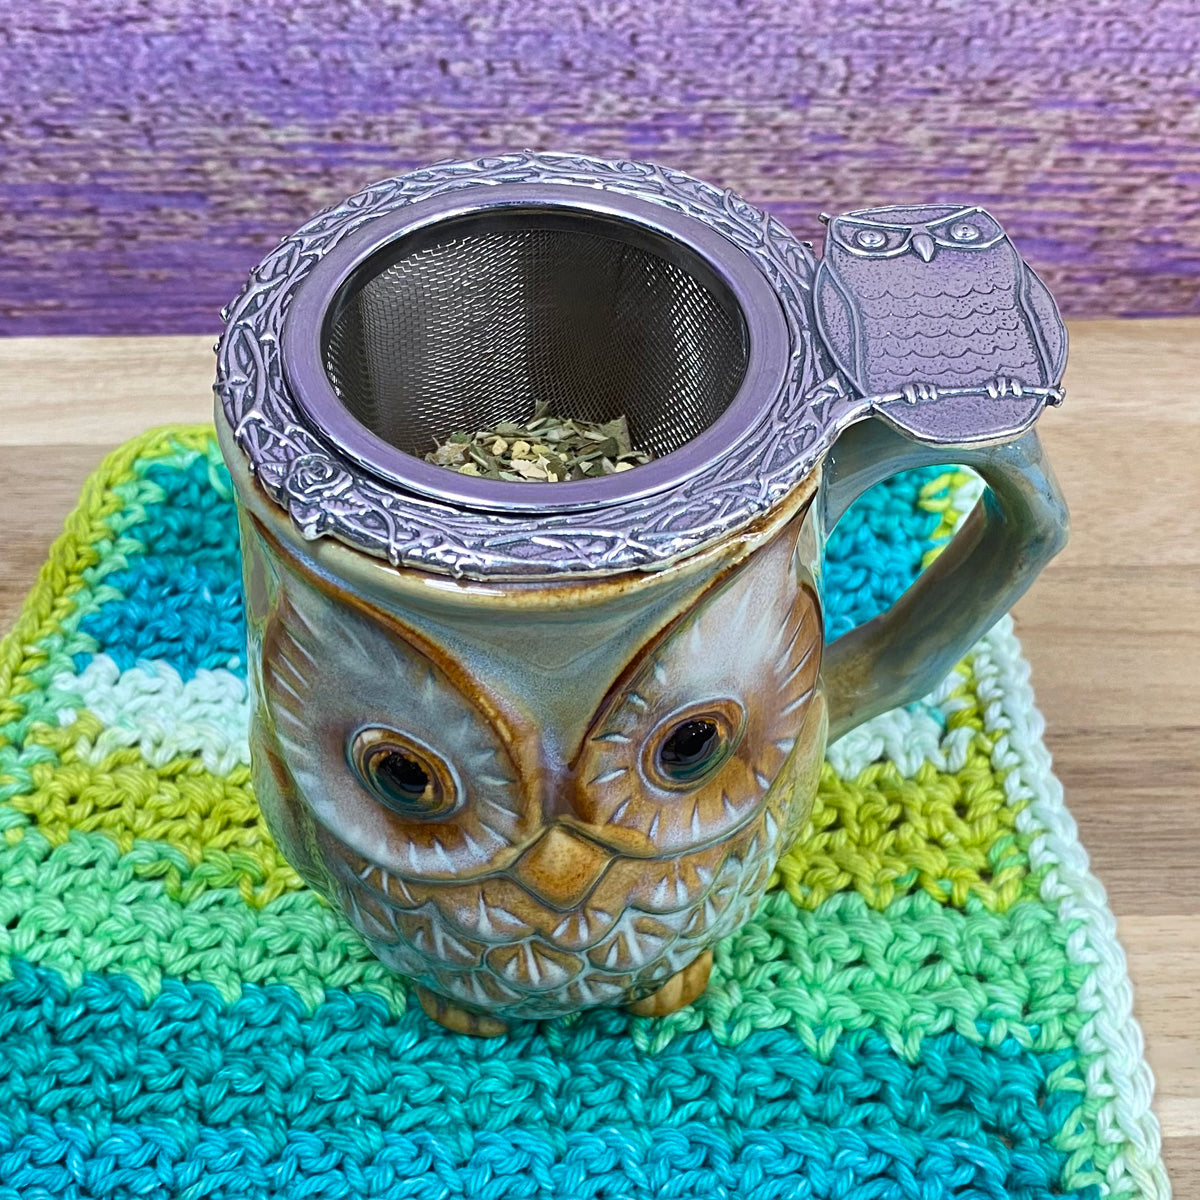 Wise Owl Pewter Tea Infuser and Mug